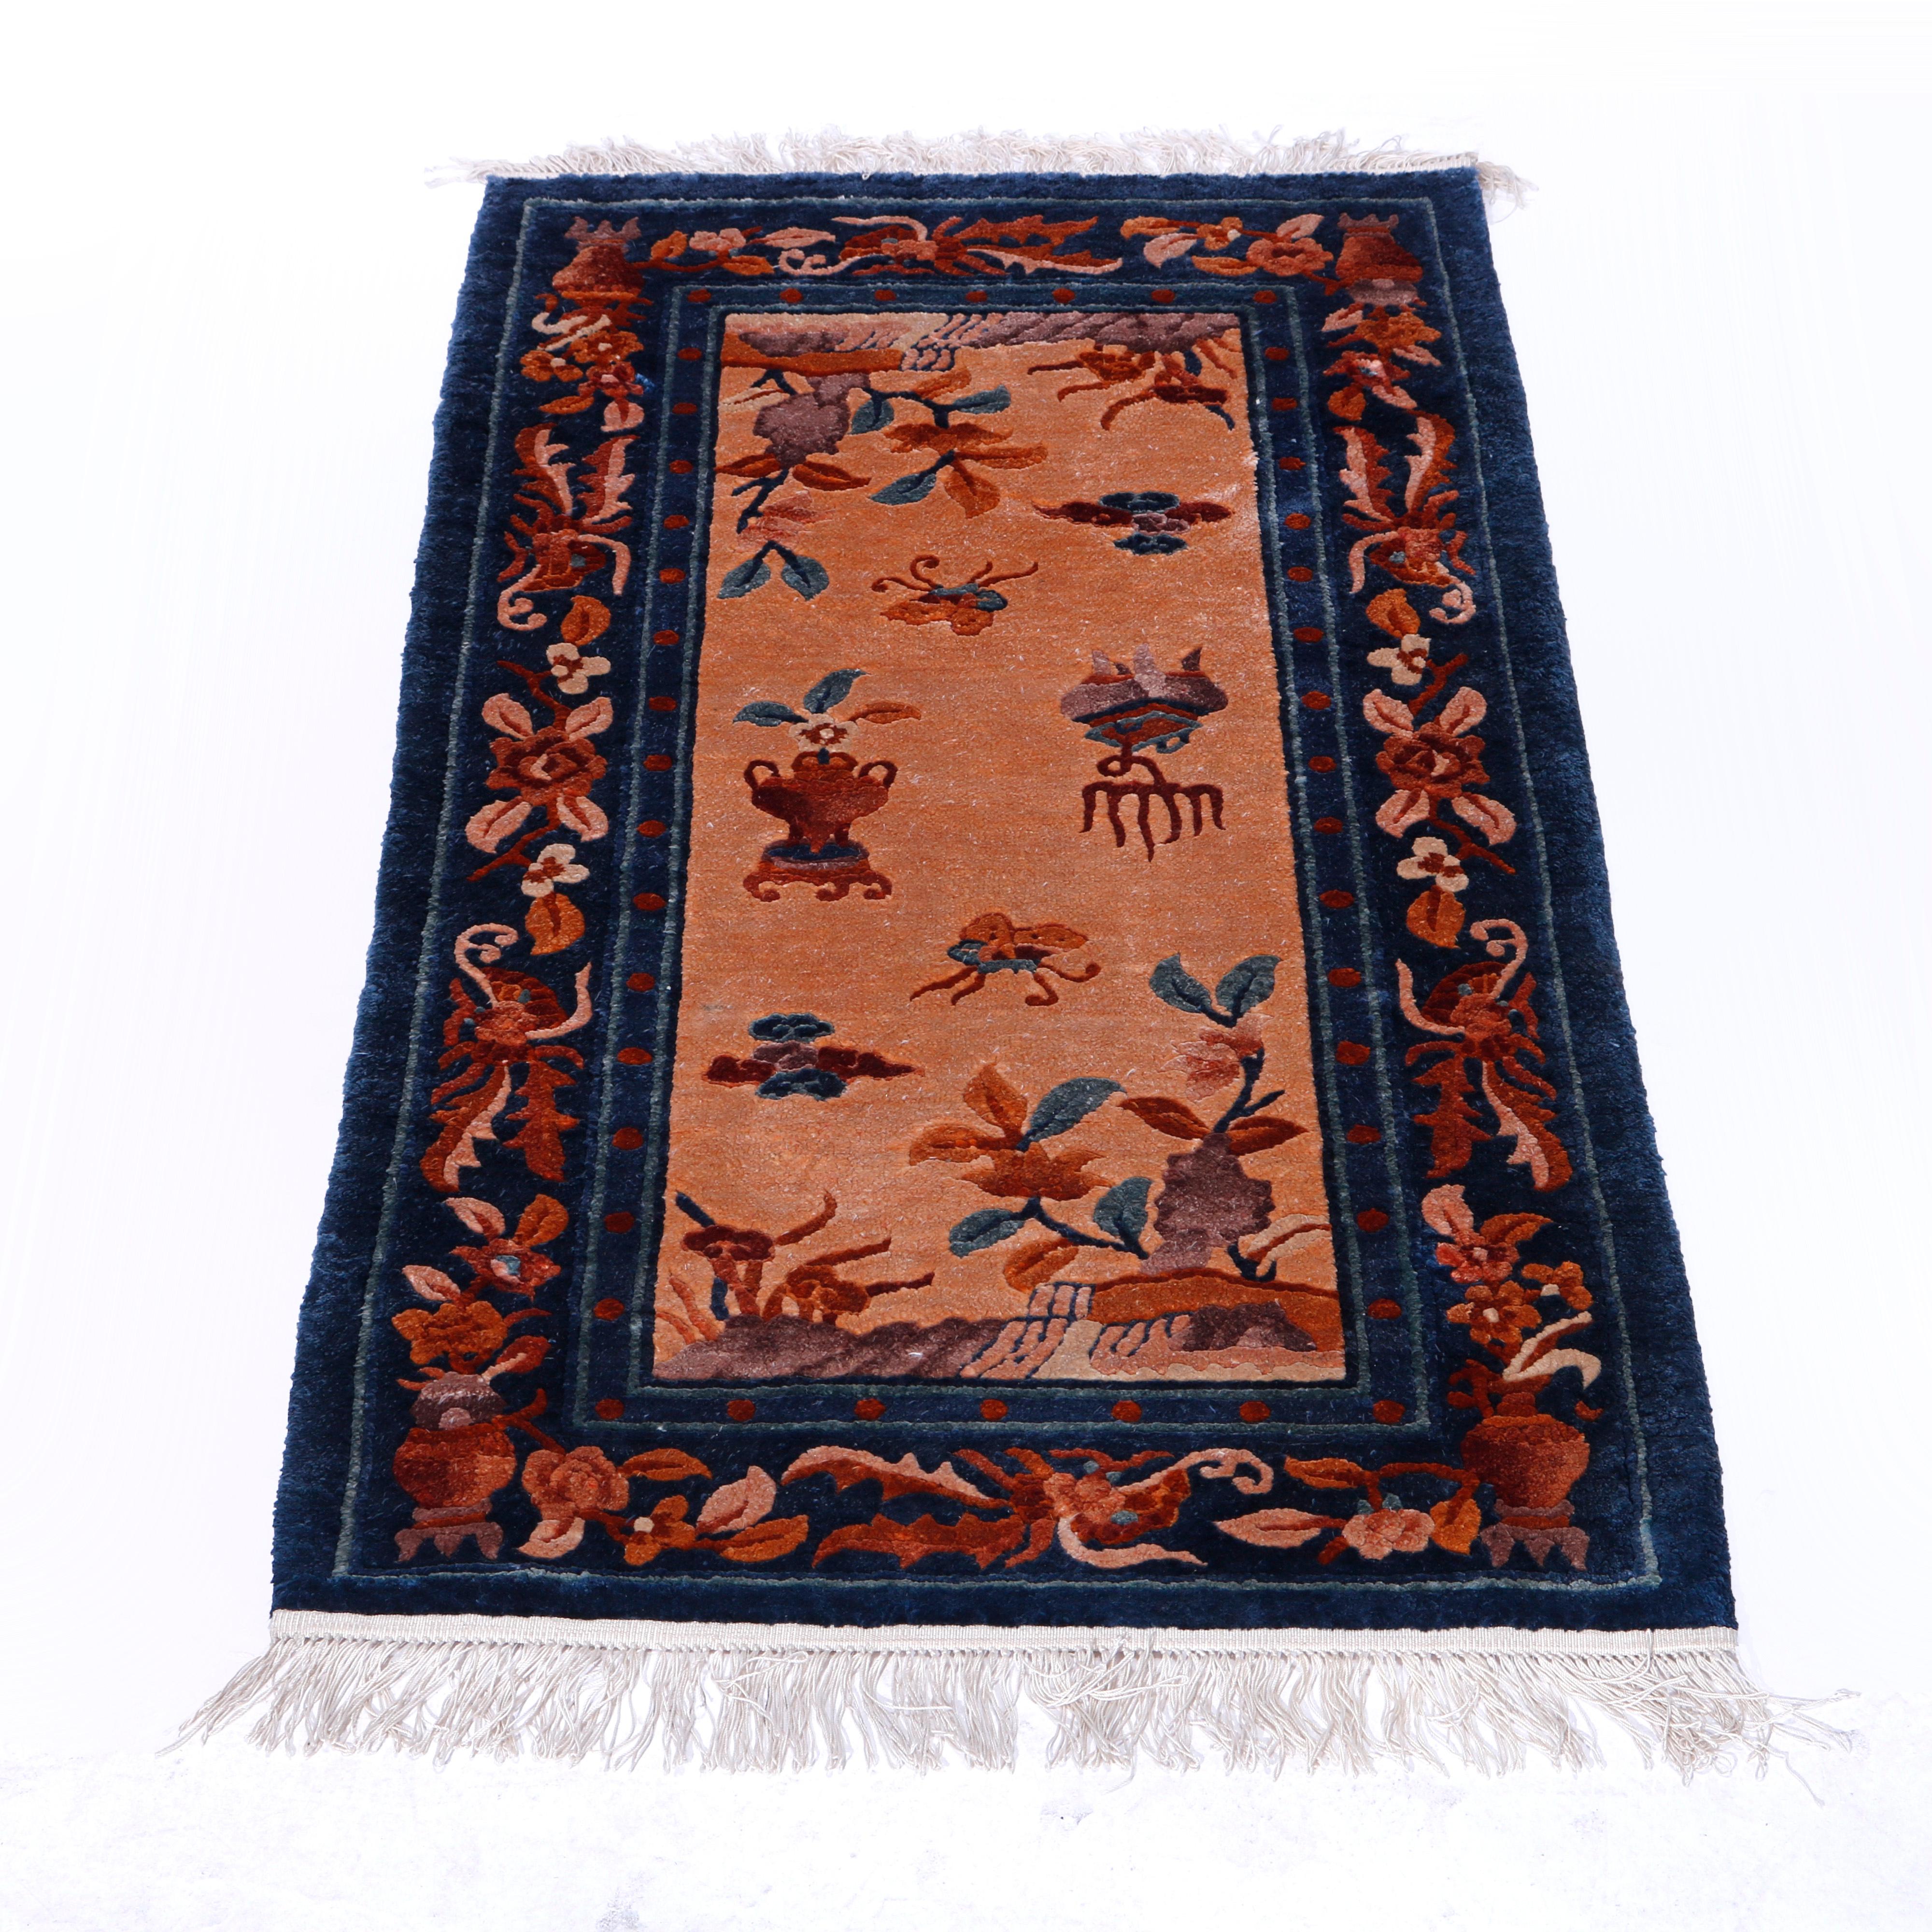 A Chinese oriental rug offers silk construction with ground having garden scene with flowers, butterflies and urns, complementing border having foliate design, 20th century

Measures - 50''W x 24.75''D x .5''H.